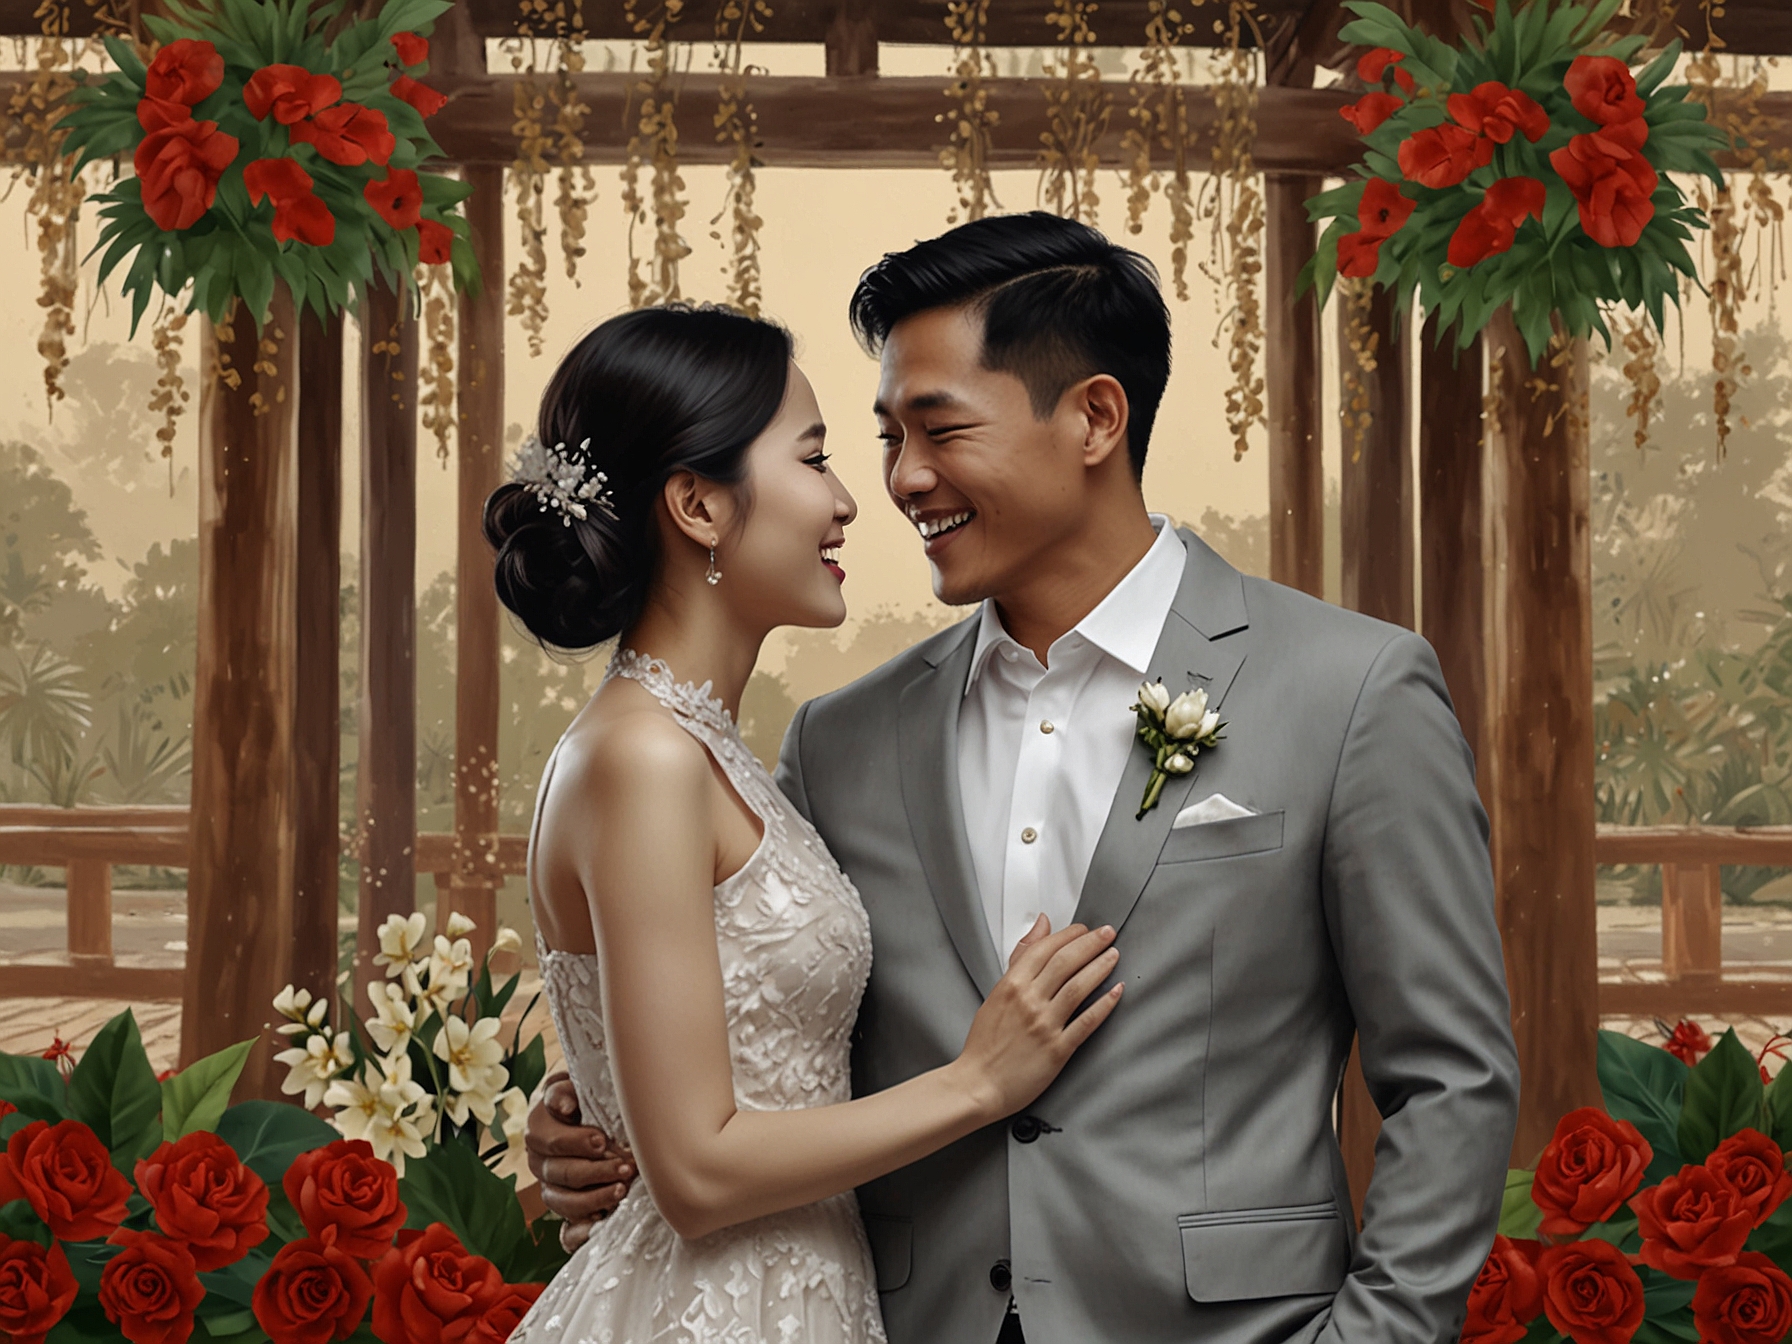 Newyear Kitiwhut and Both Nattapong sharing a joyful moment during their engagement ceremony, surrounded by a beautifully decorated backdrop symbolizing their love and commitment.